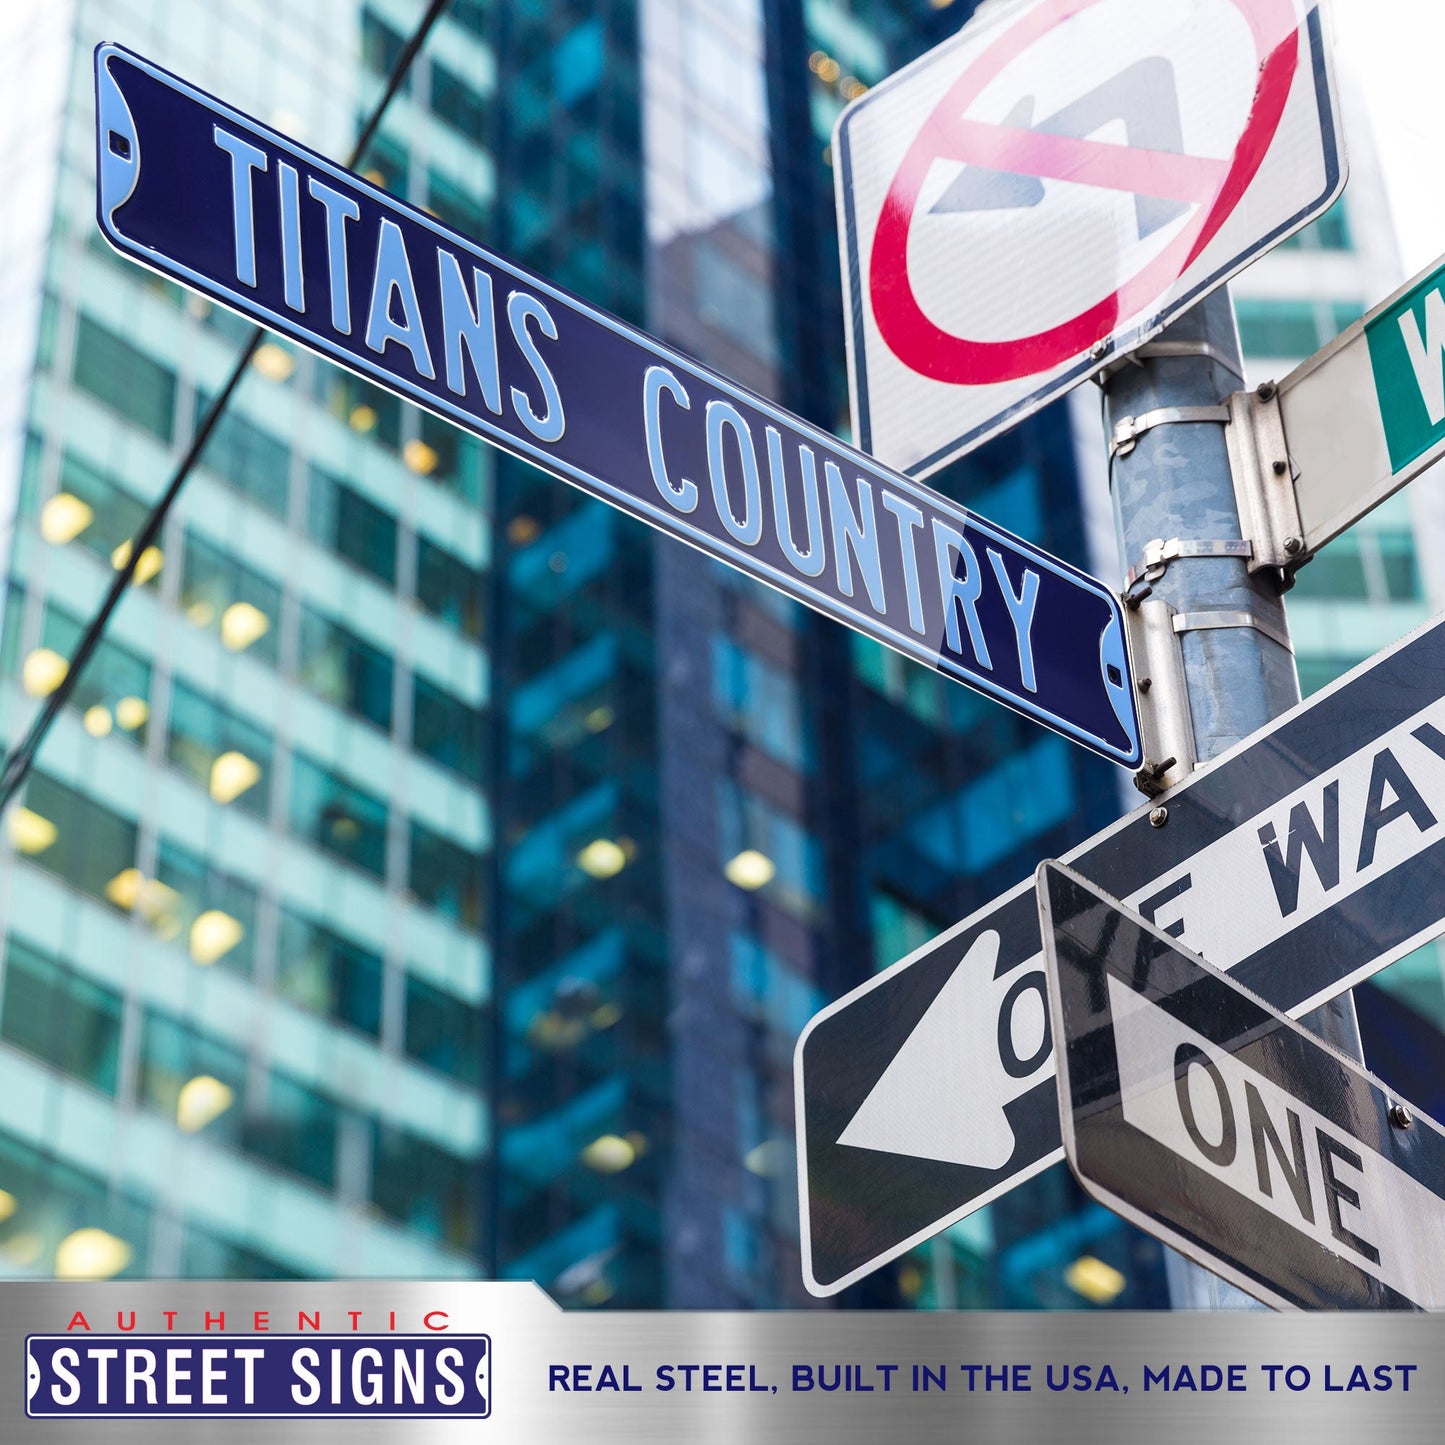 Tennessee Titans - TITANS COUNTRY - Embossed Steel Street Sign